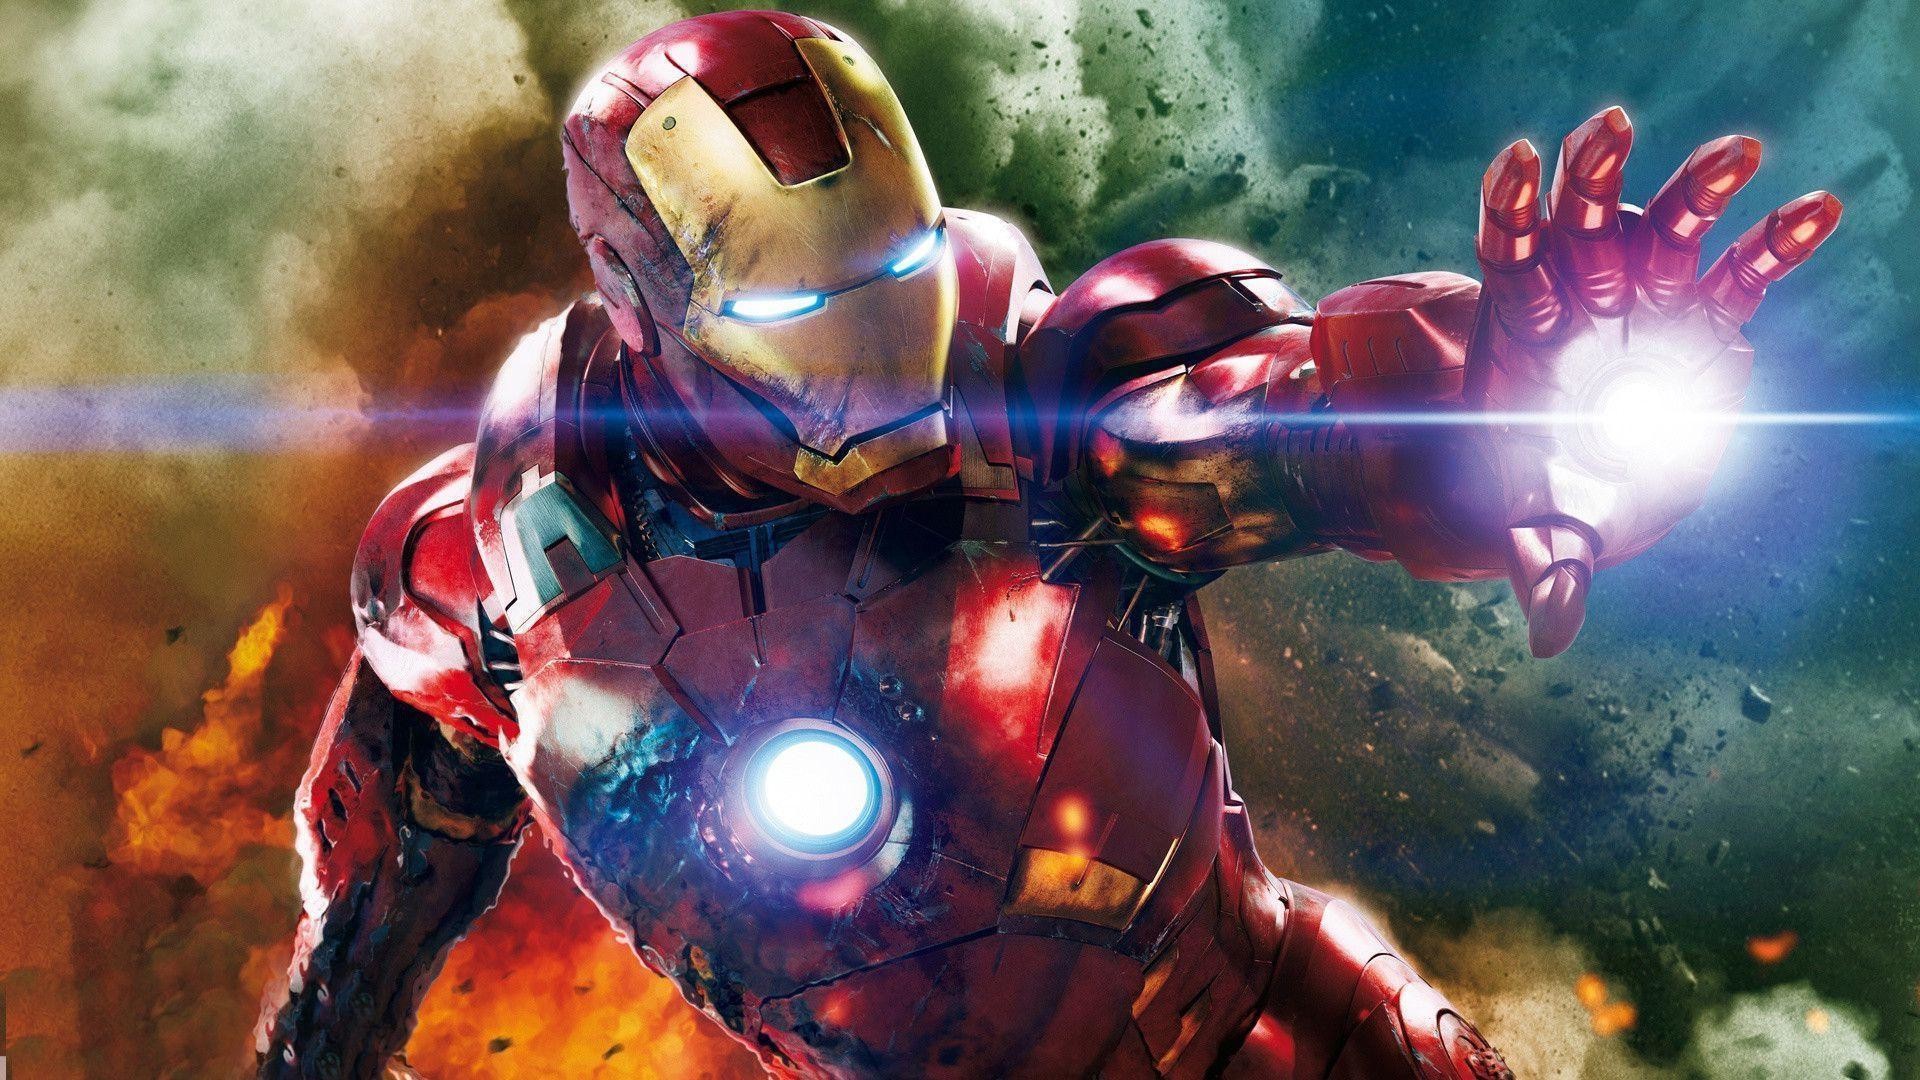 1920x1080 Wallpapers For > Iron Man 3 Wallpaper Hd 1024x768